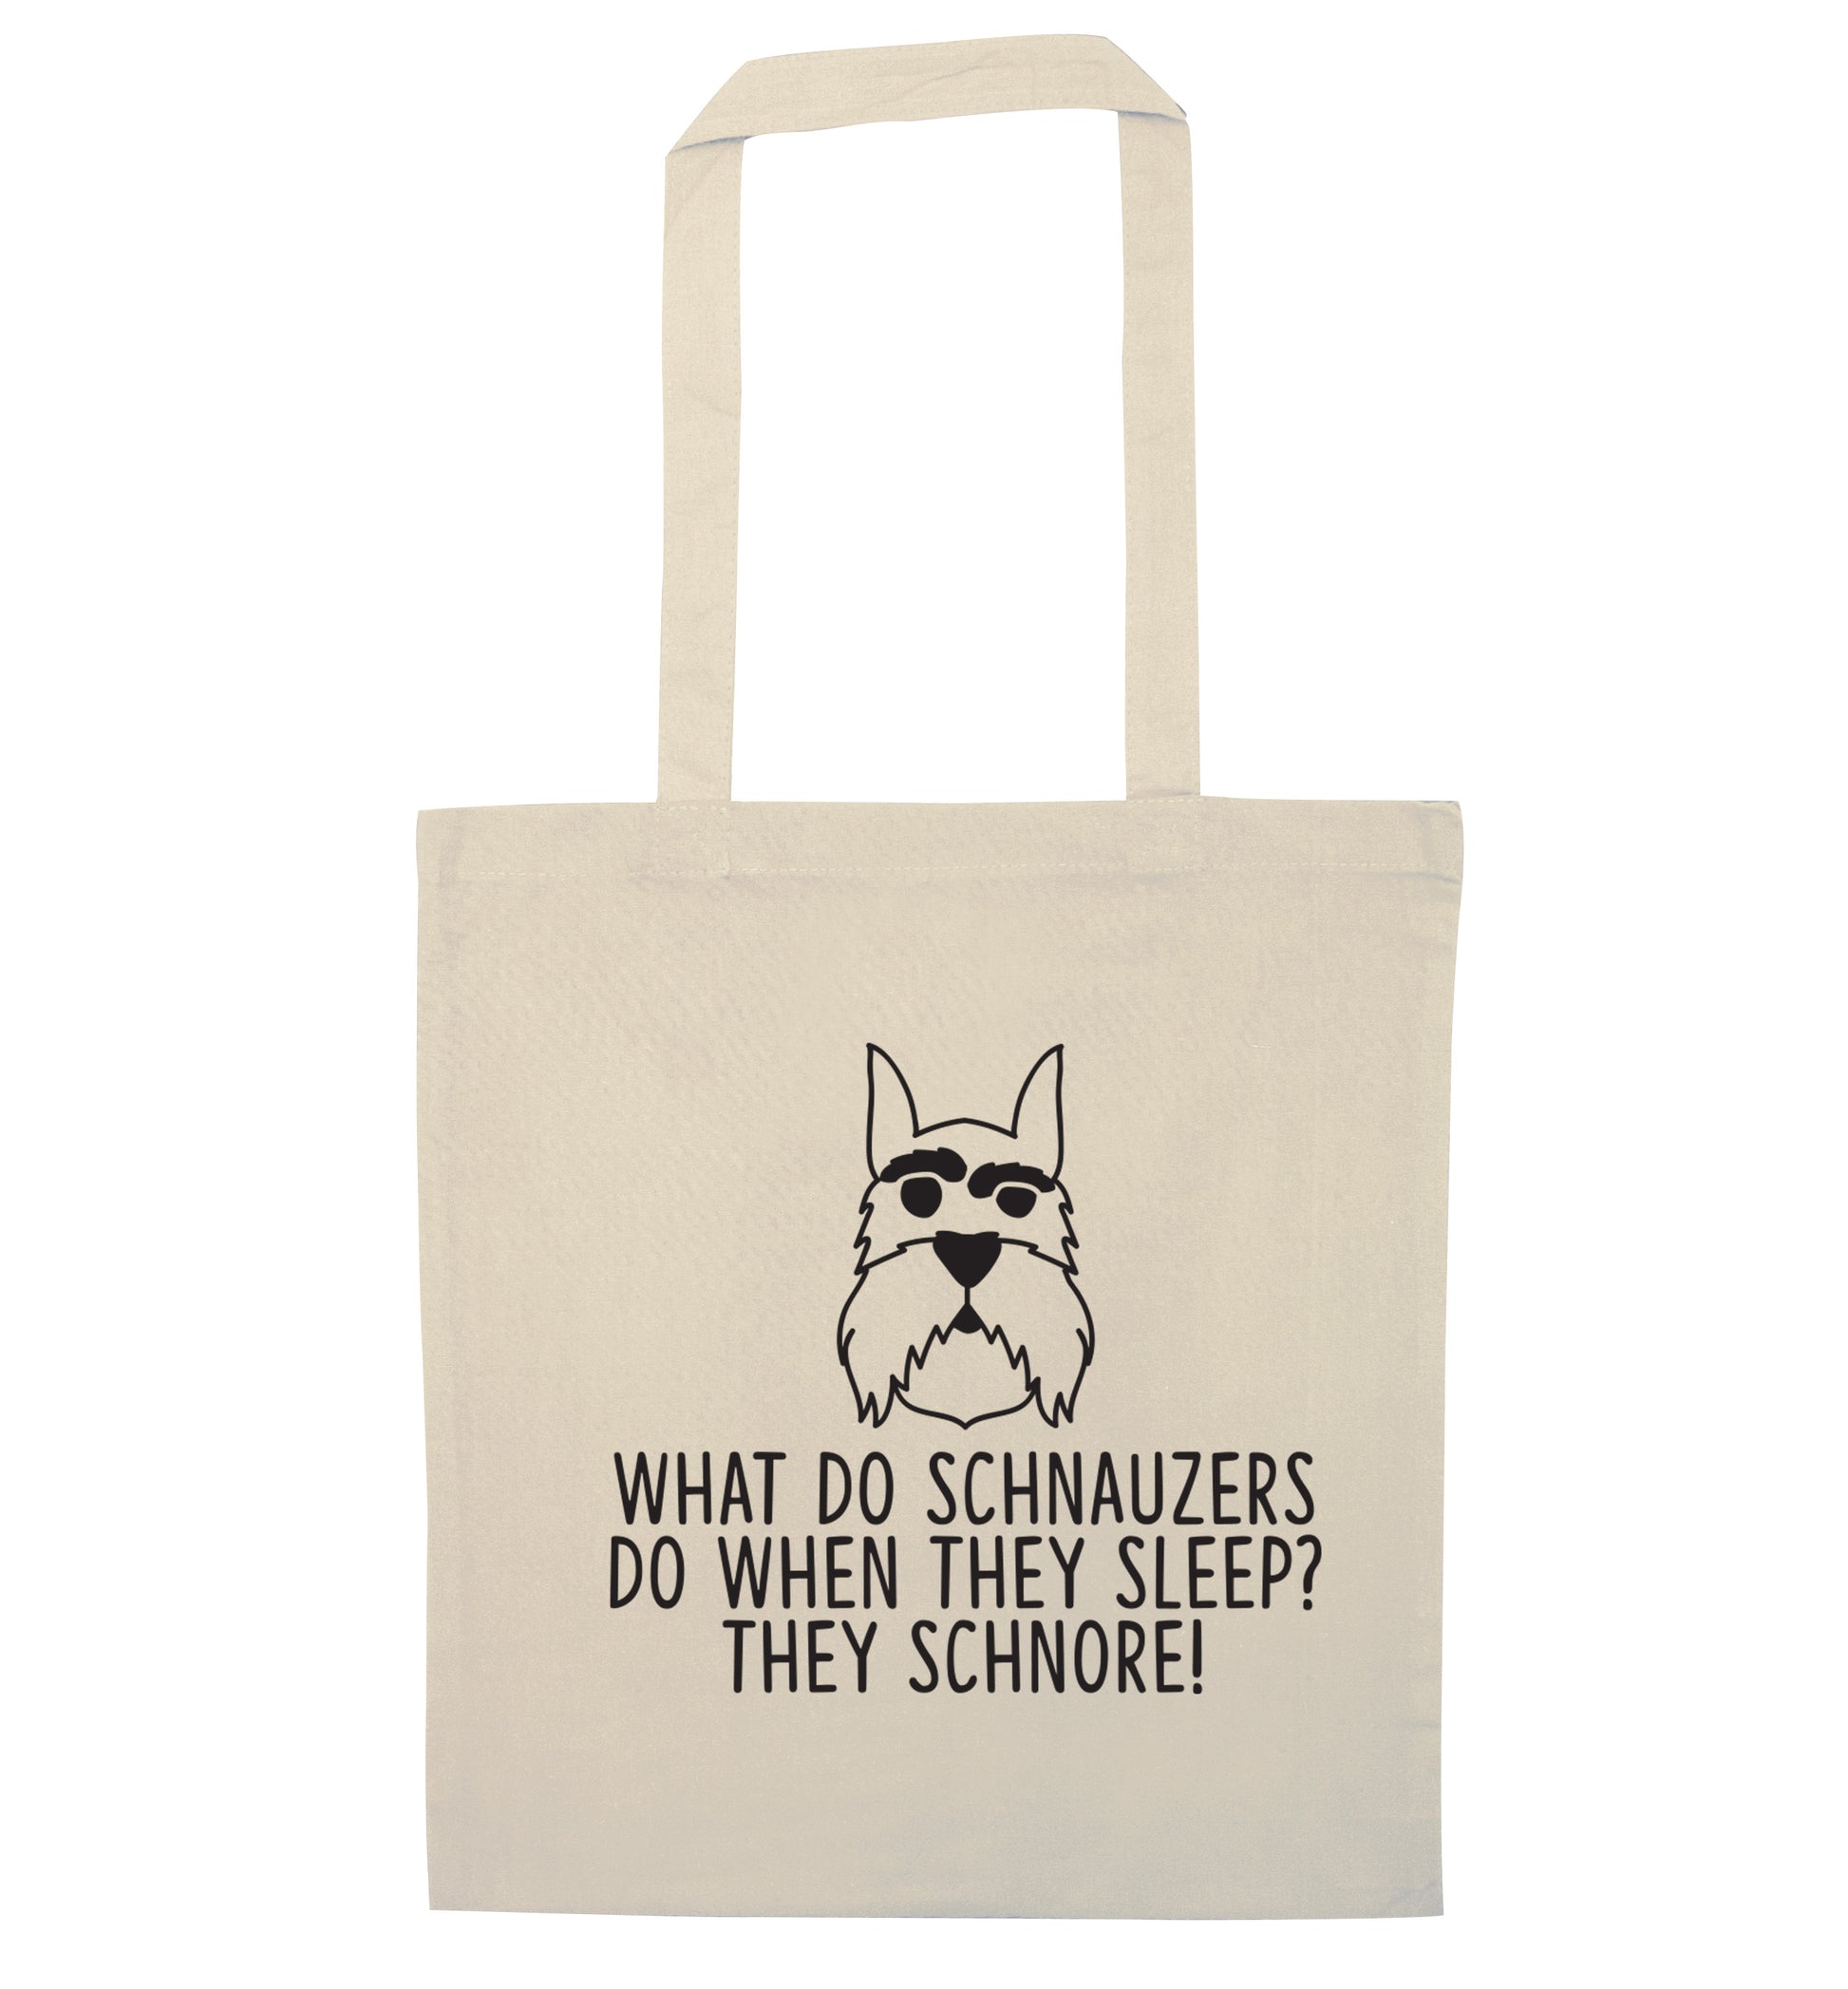 What do schnauzers do when they sleep? Schnore! natural tote bag